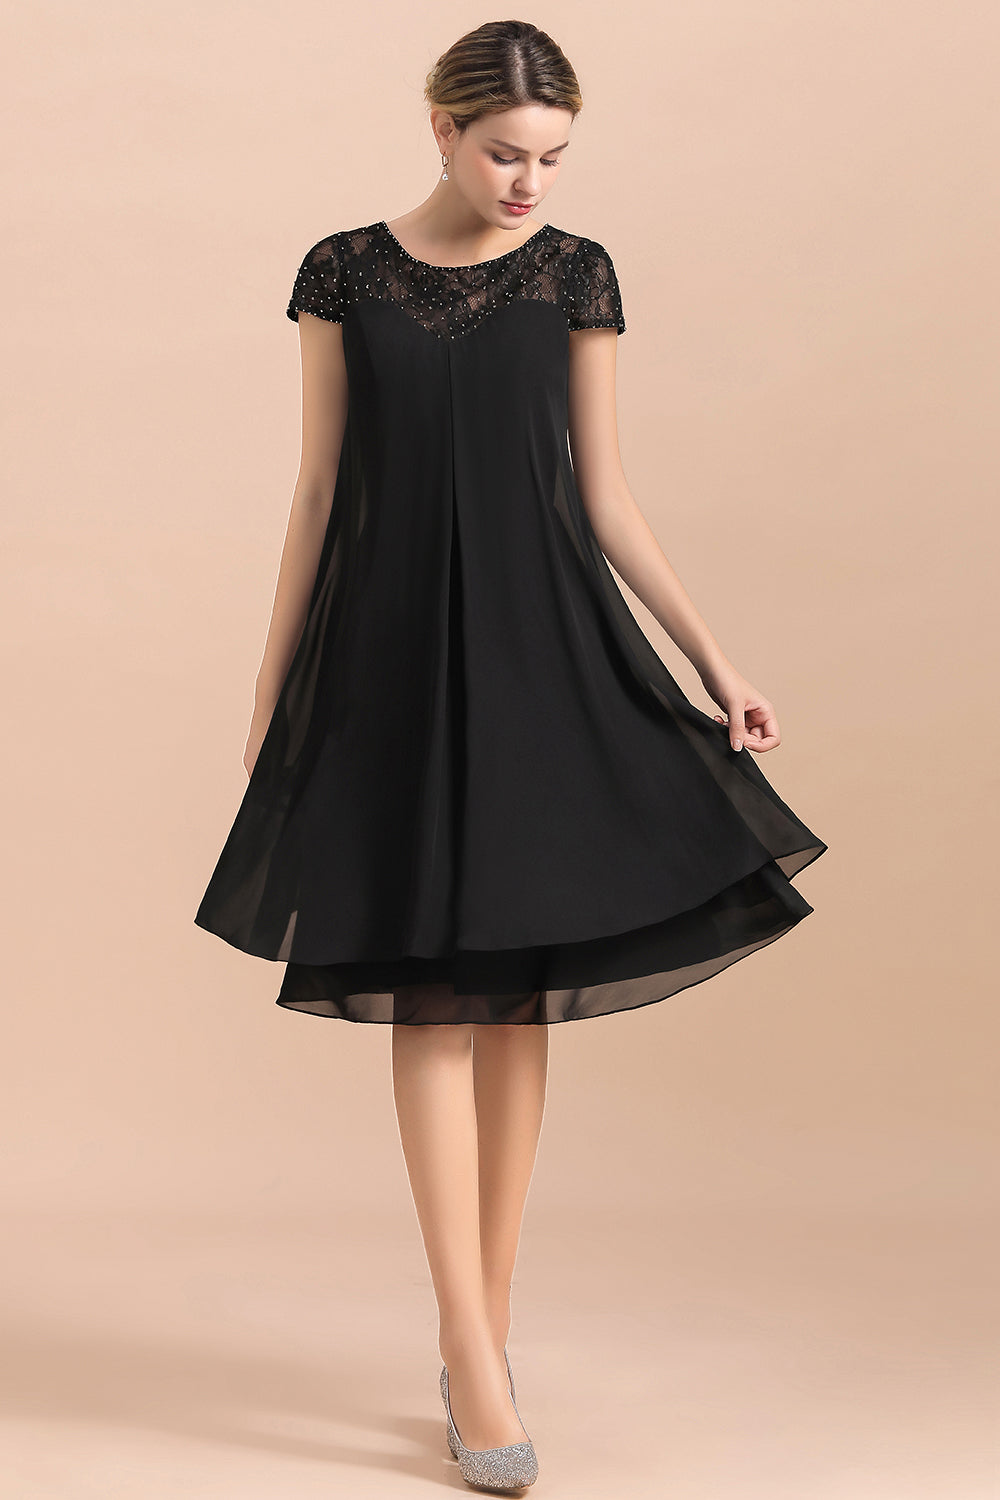 Chic Black Cap Sleeve Mother of Bride Dress Chiffon Short Wedding Party Gowns